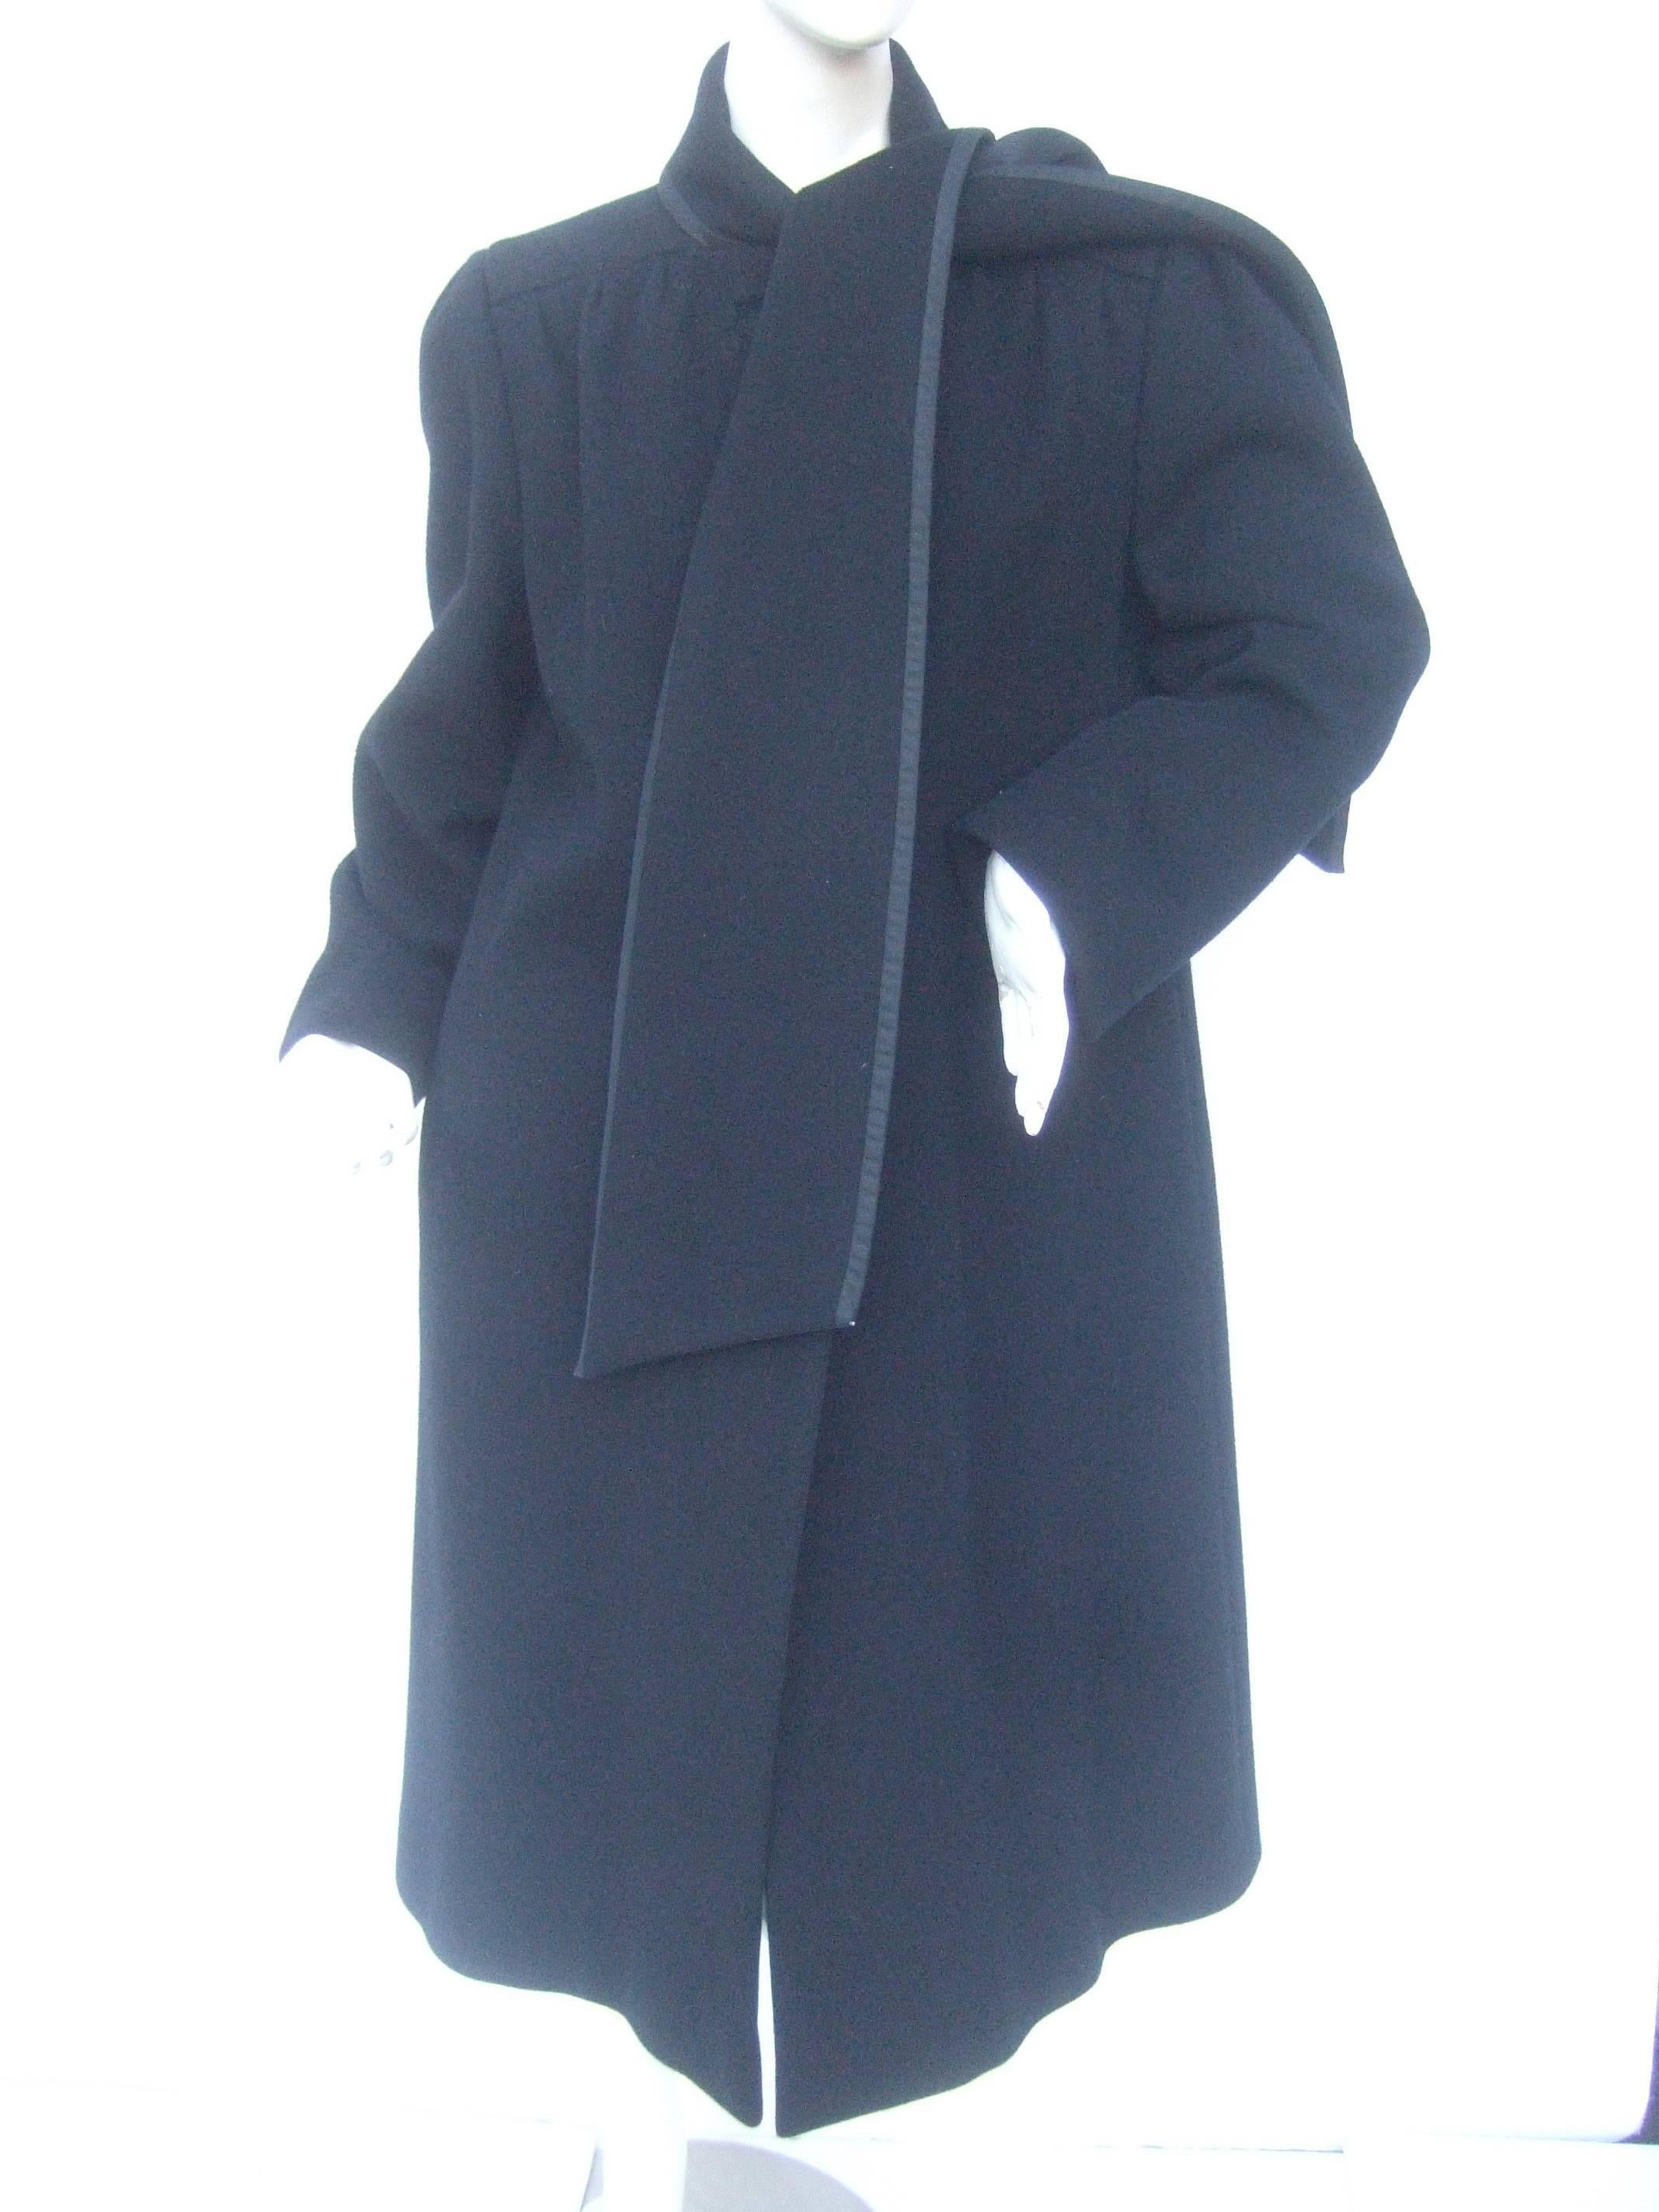 Pauline Trigere Unique black wool winter coat with built in scarf
The stylish coat is designed with a wide dramatic built in collar 
scarf that can be draped over the shoulders or left loose running 
down the the front

The scarf is trimmed